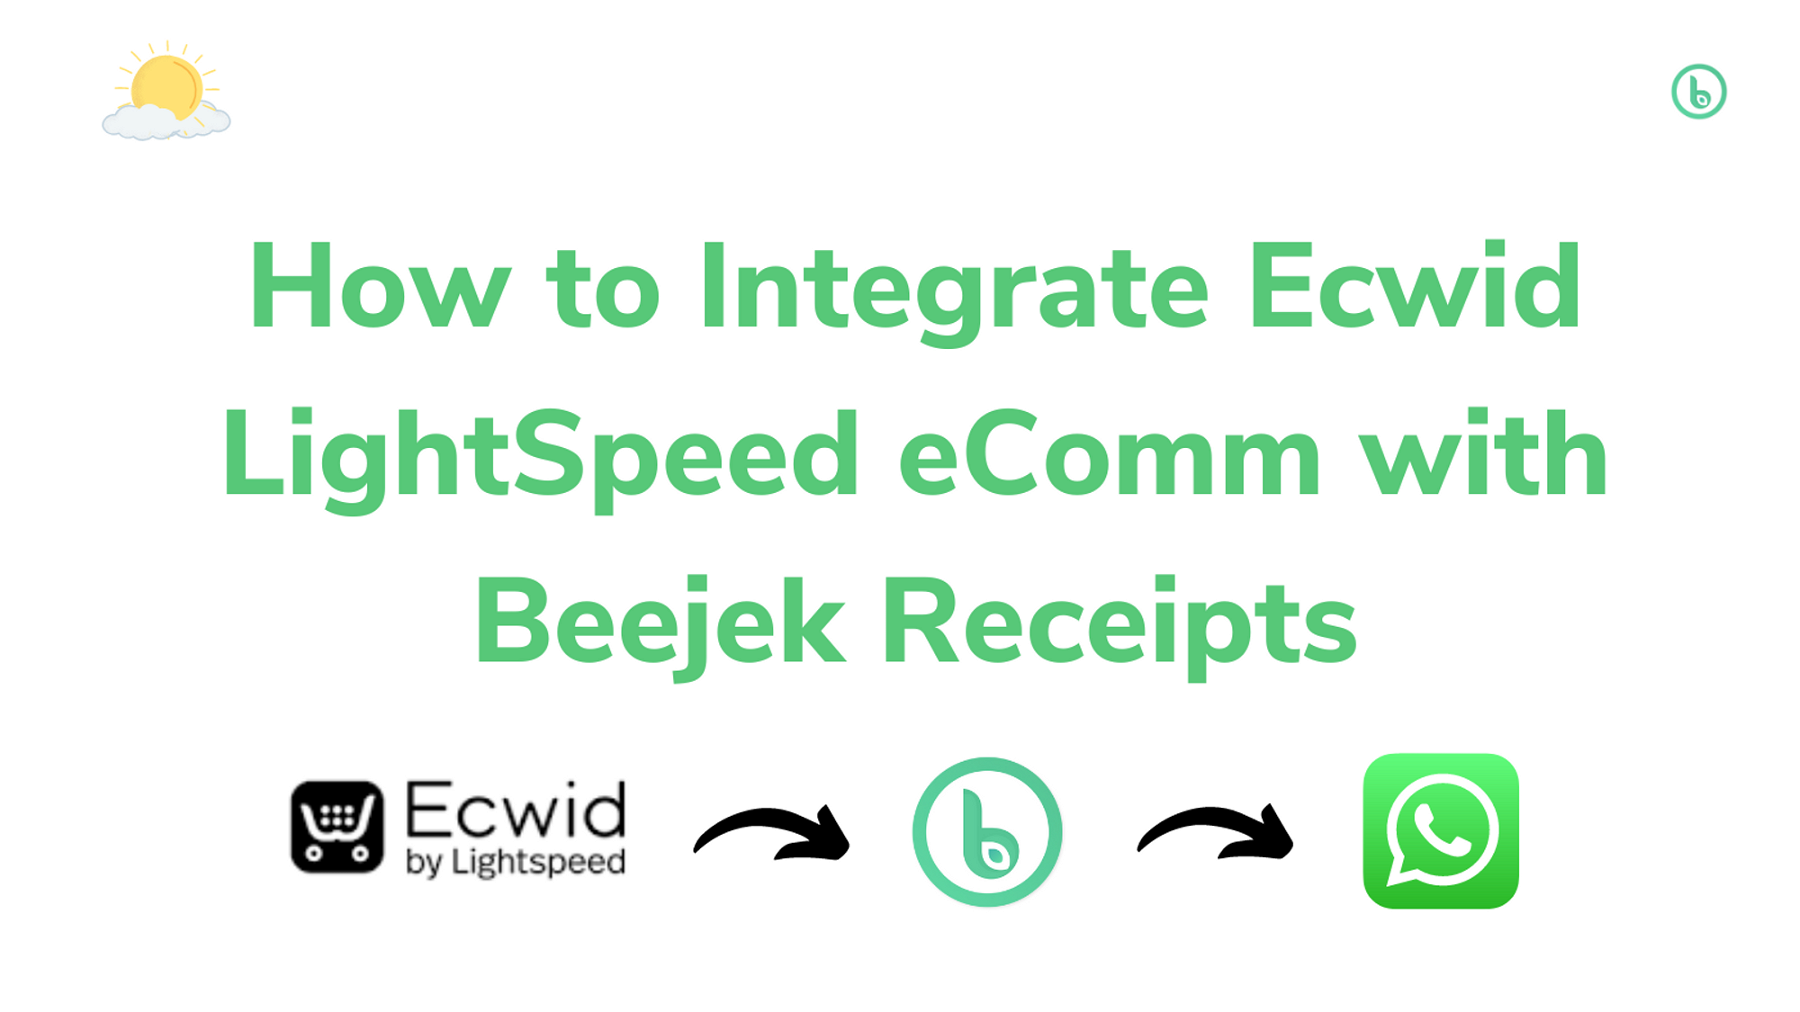 How to Integrate your Ecwid LightSpeed eCommerce Store with Beejek Receipts